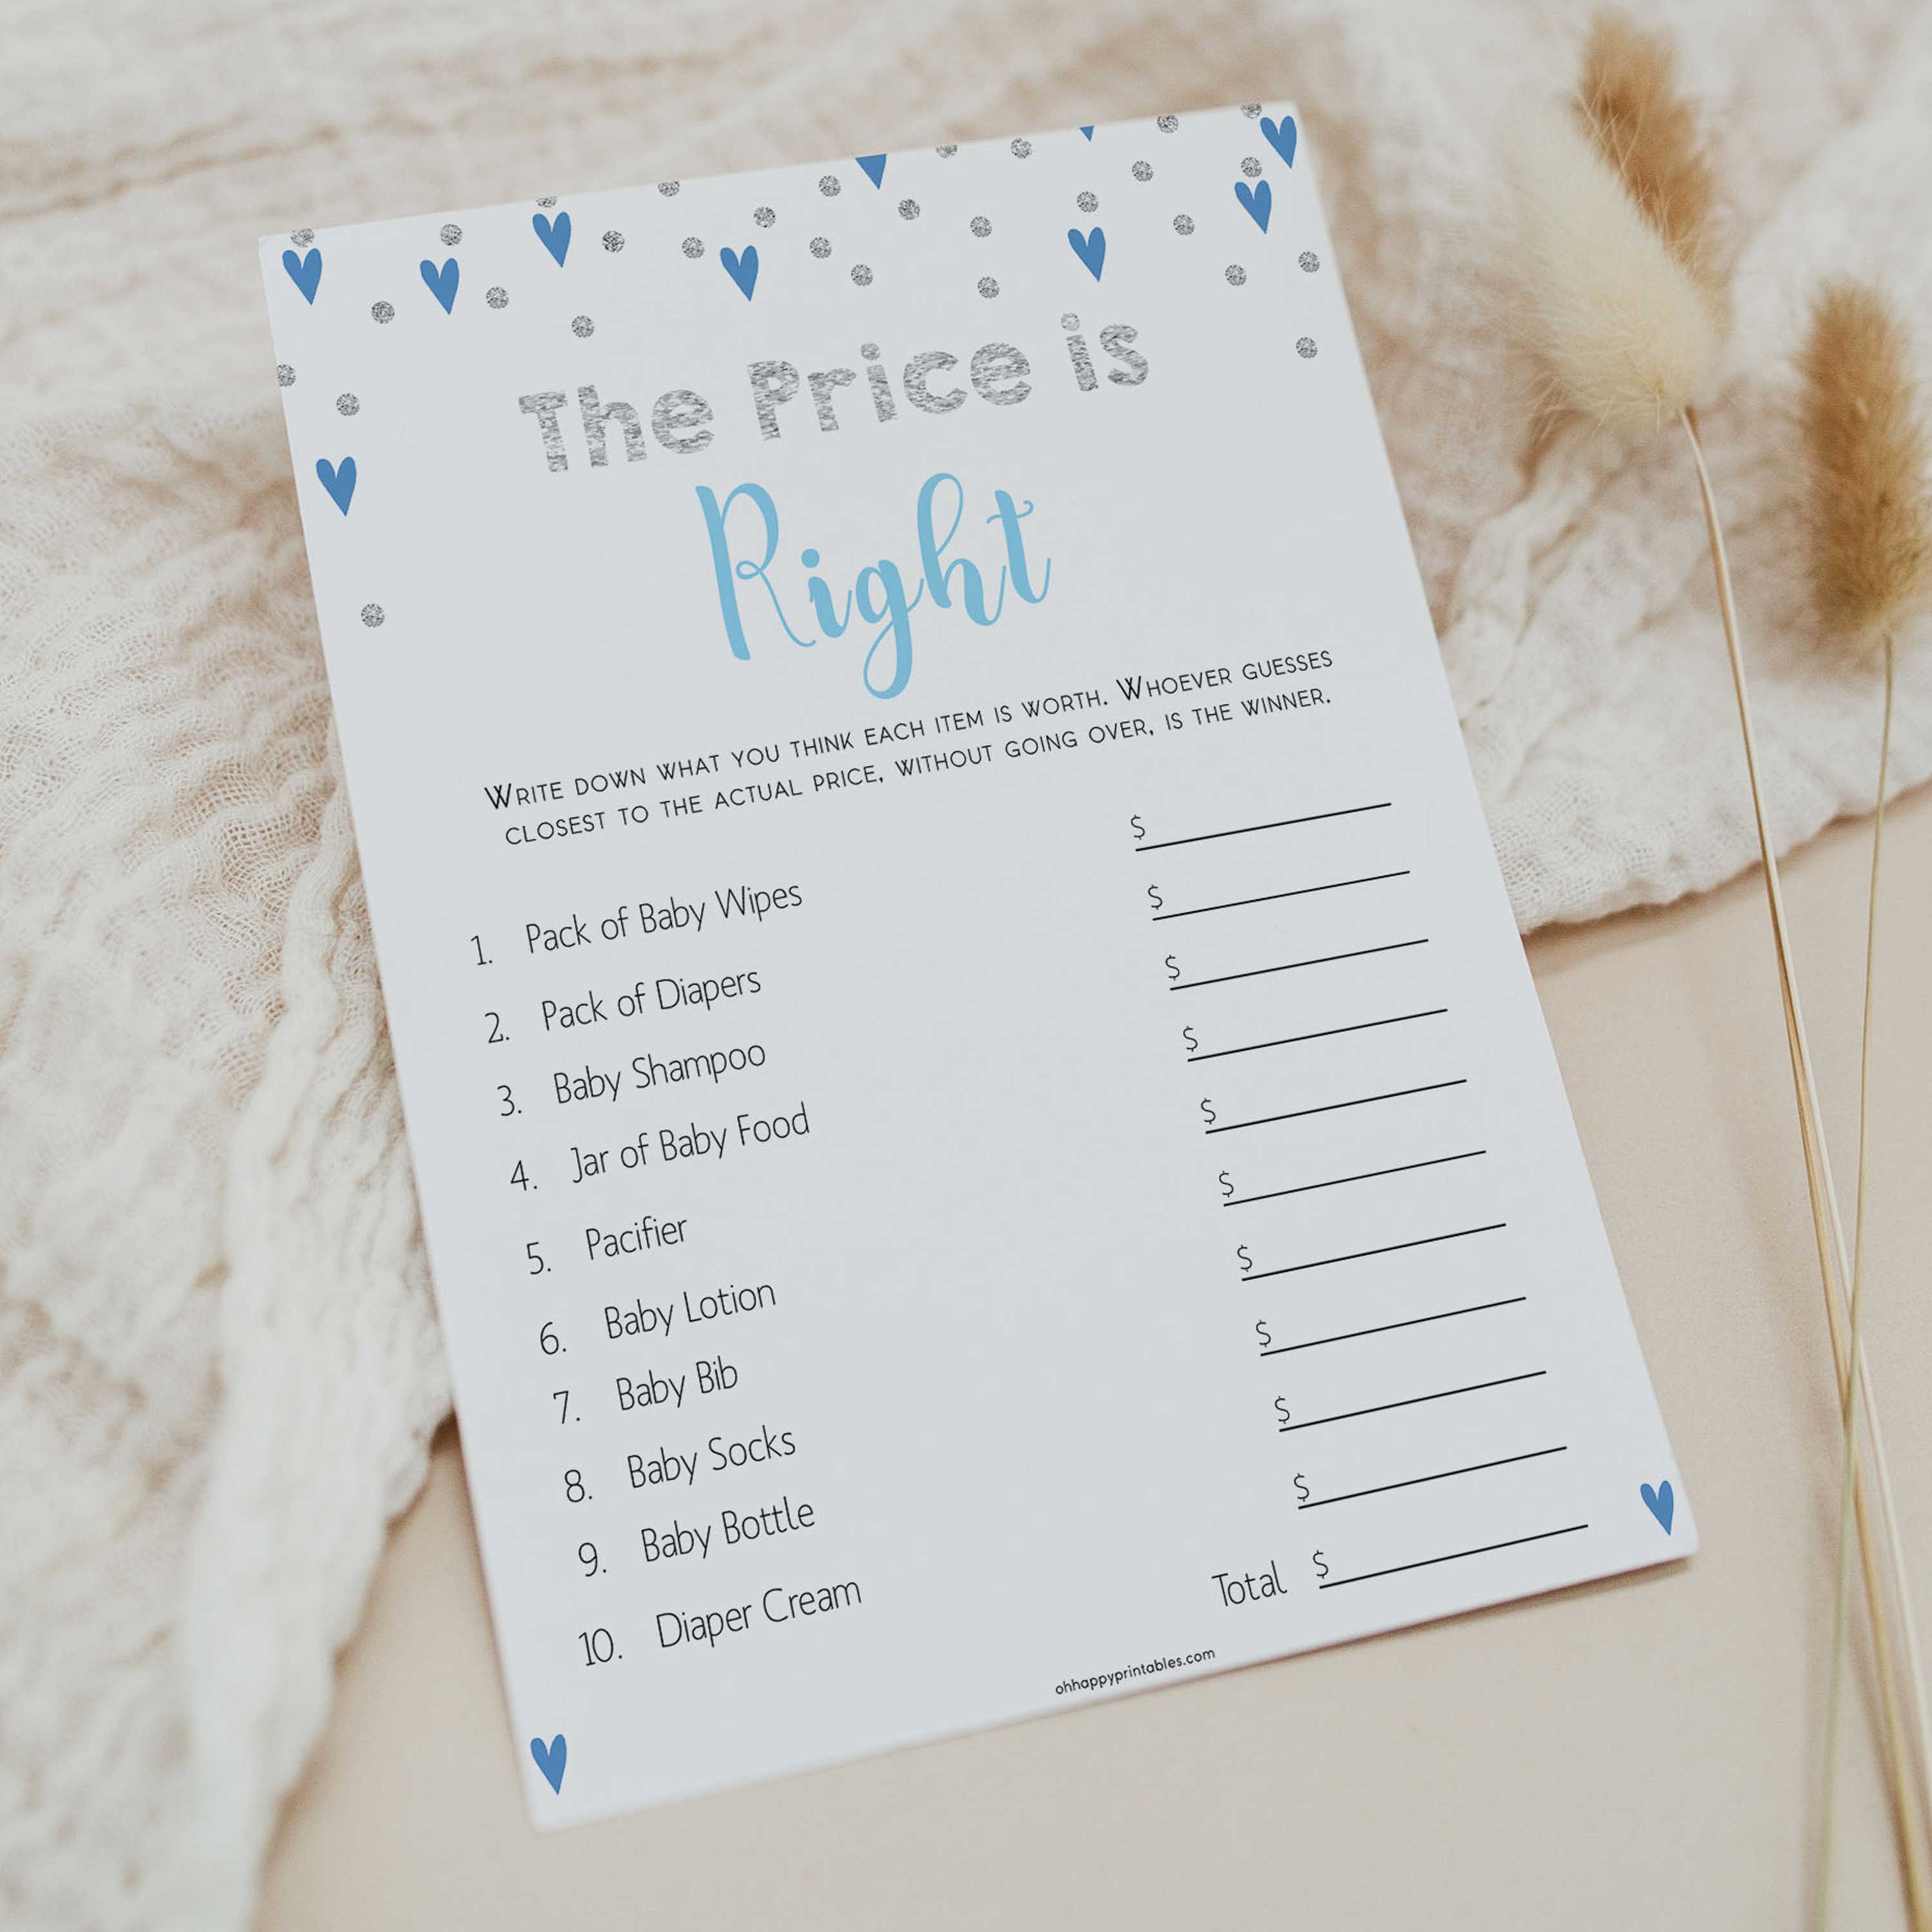 baby price is right game, guess the baby product prices, Printable baby shower games, small blue hearts fun baby games, baby shower games, fun baby shower ideas, top baby shower ideas, silver baby shower, blue hearts baby shower ideas